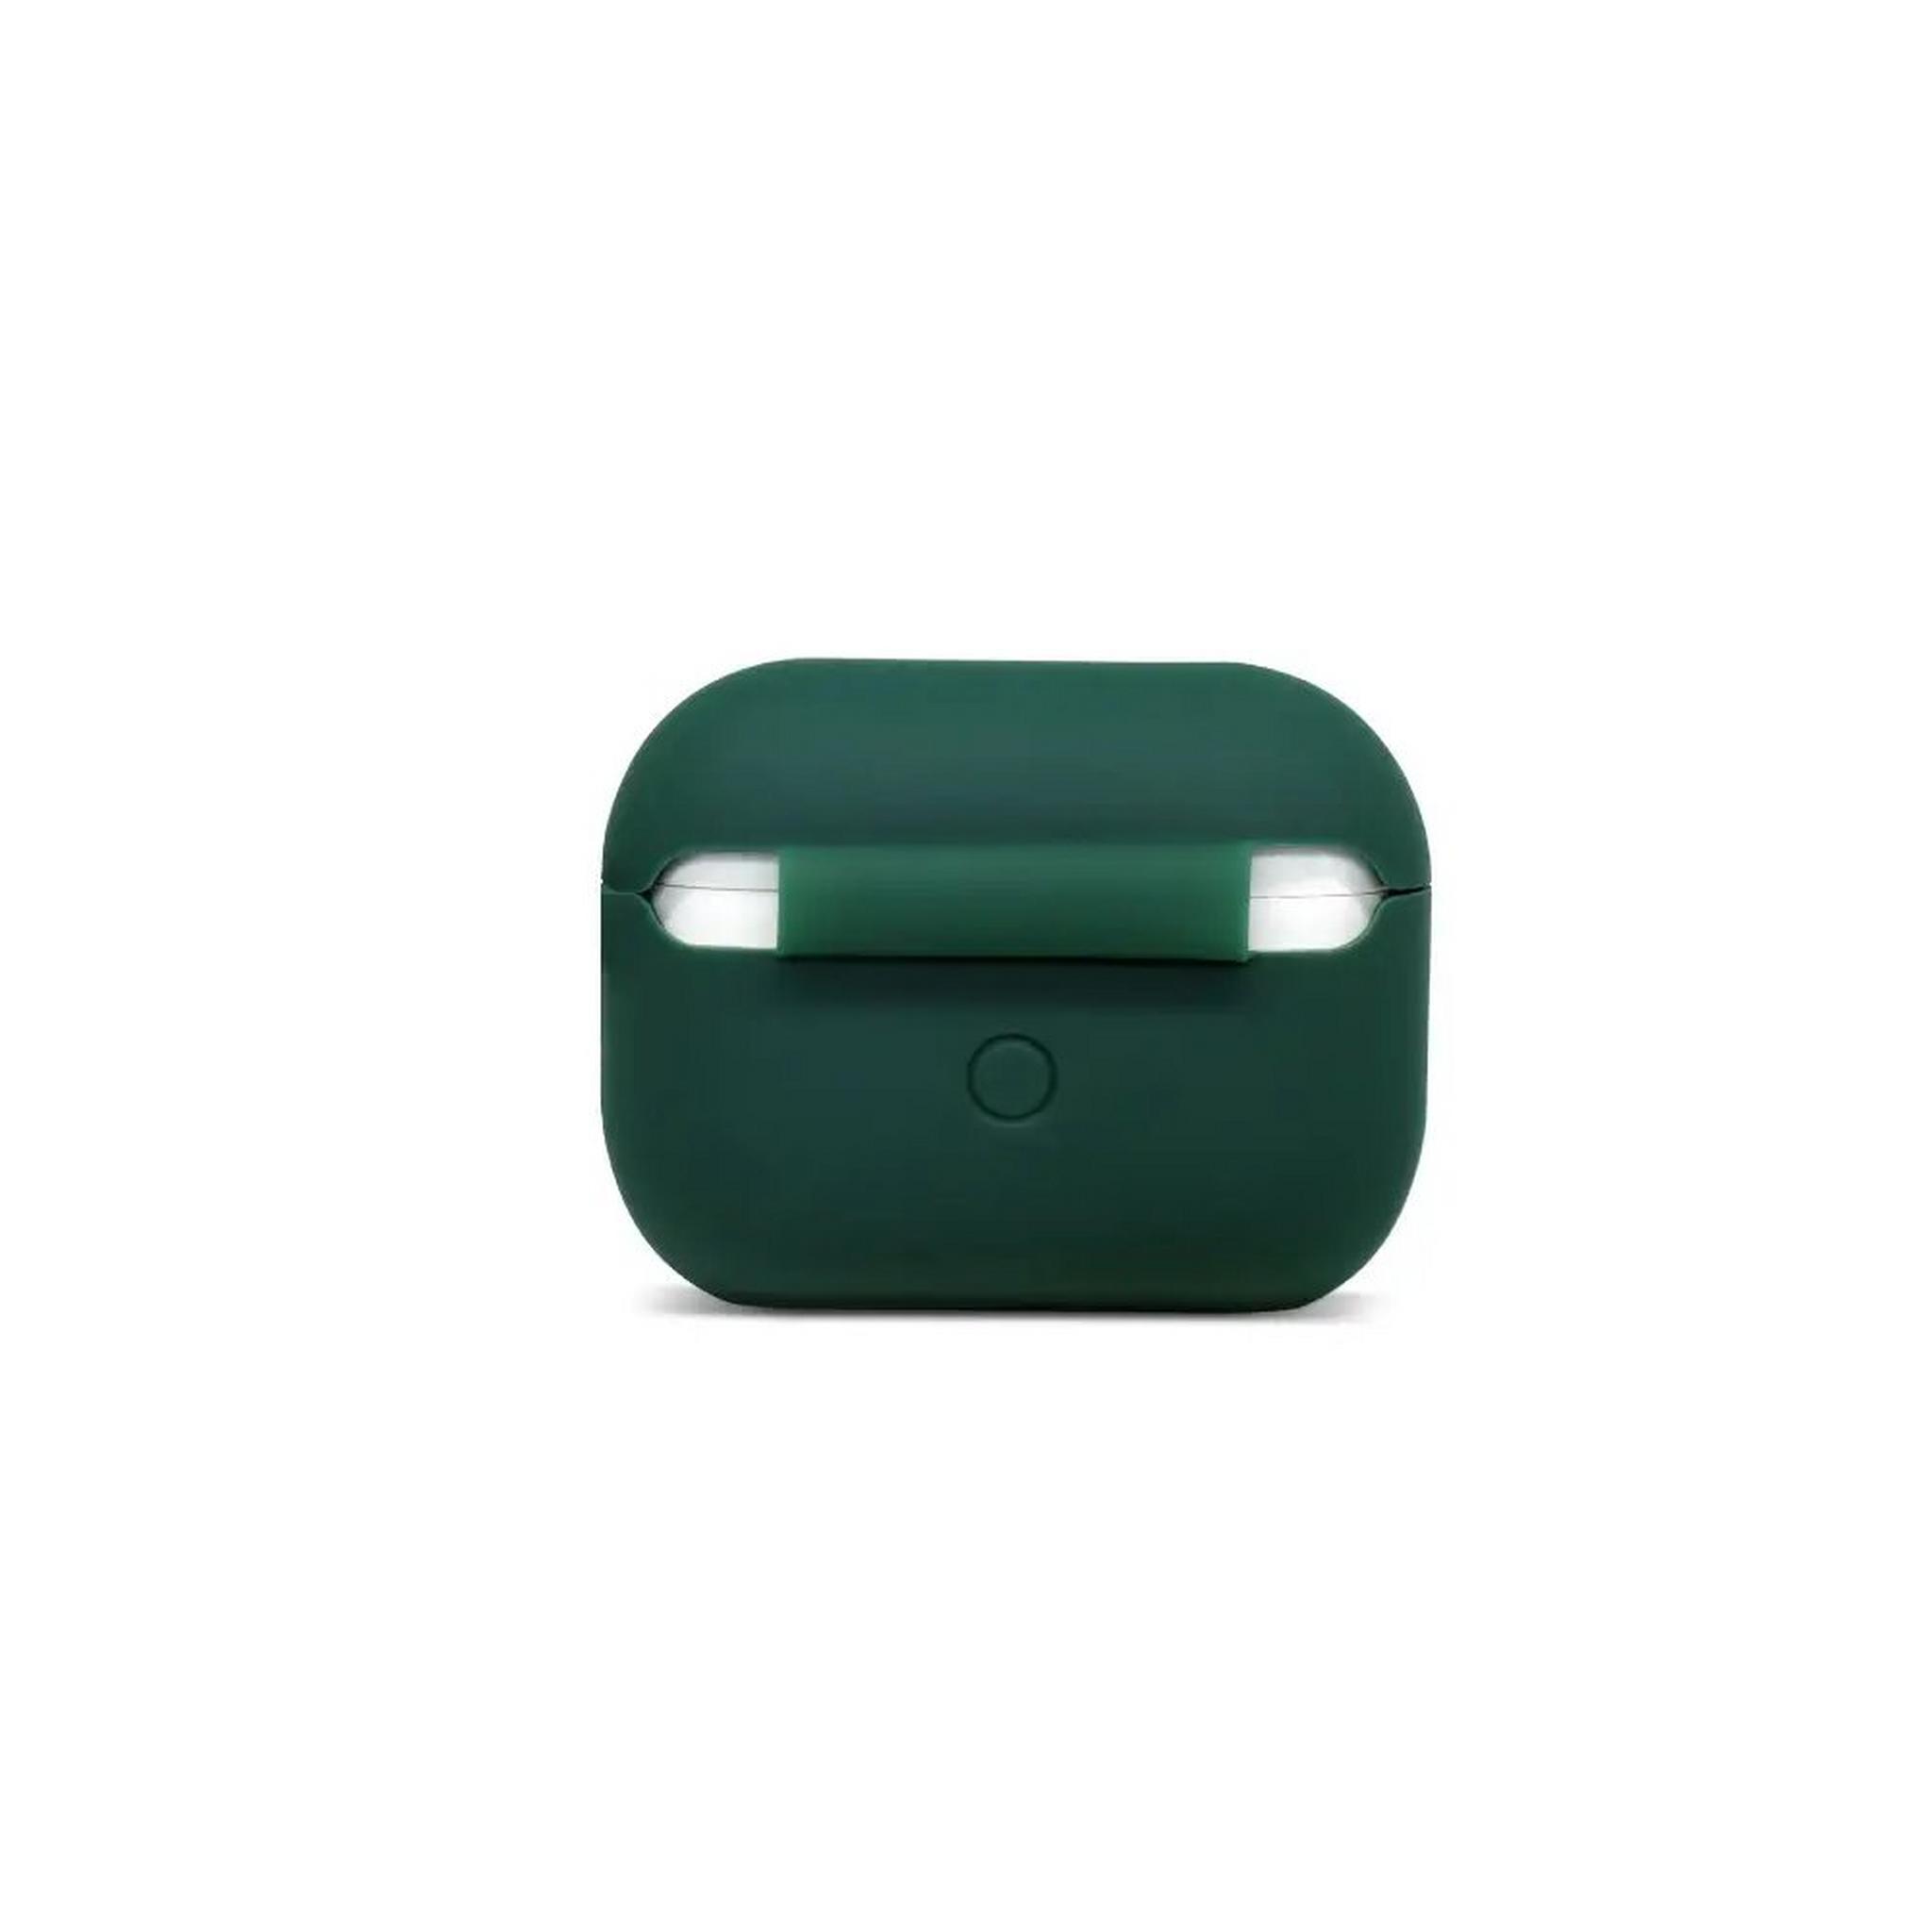 Hyphen Silicone + Clear Case For Apple Airpods Pro 2nd Gen, HAC-SCP2GR6890 - Green